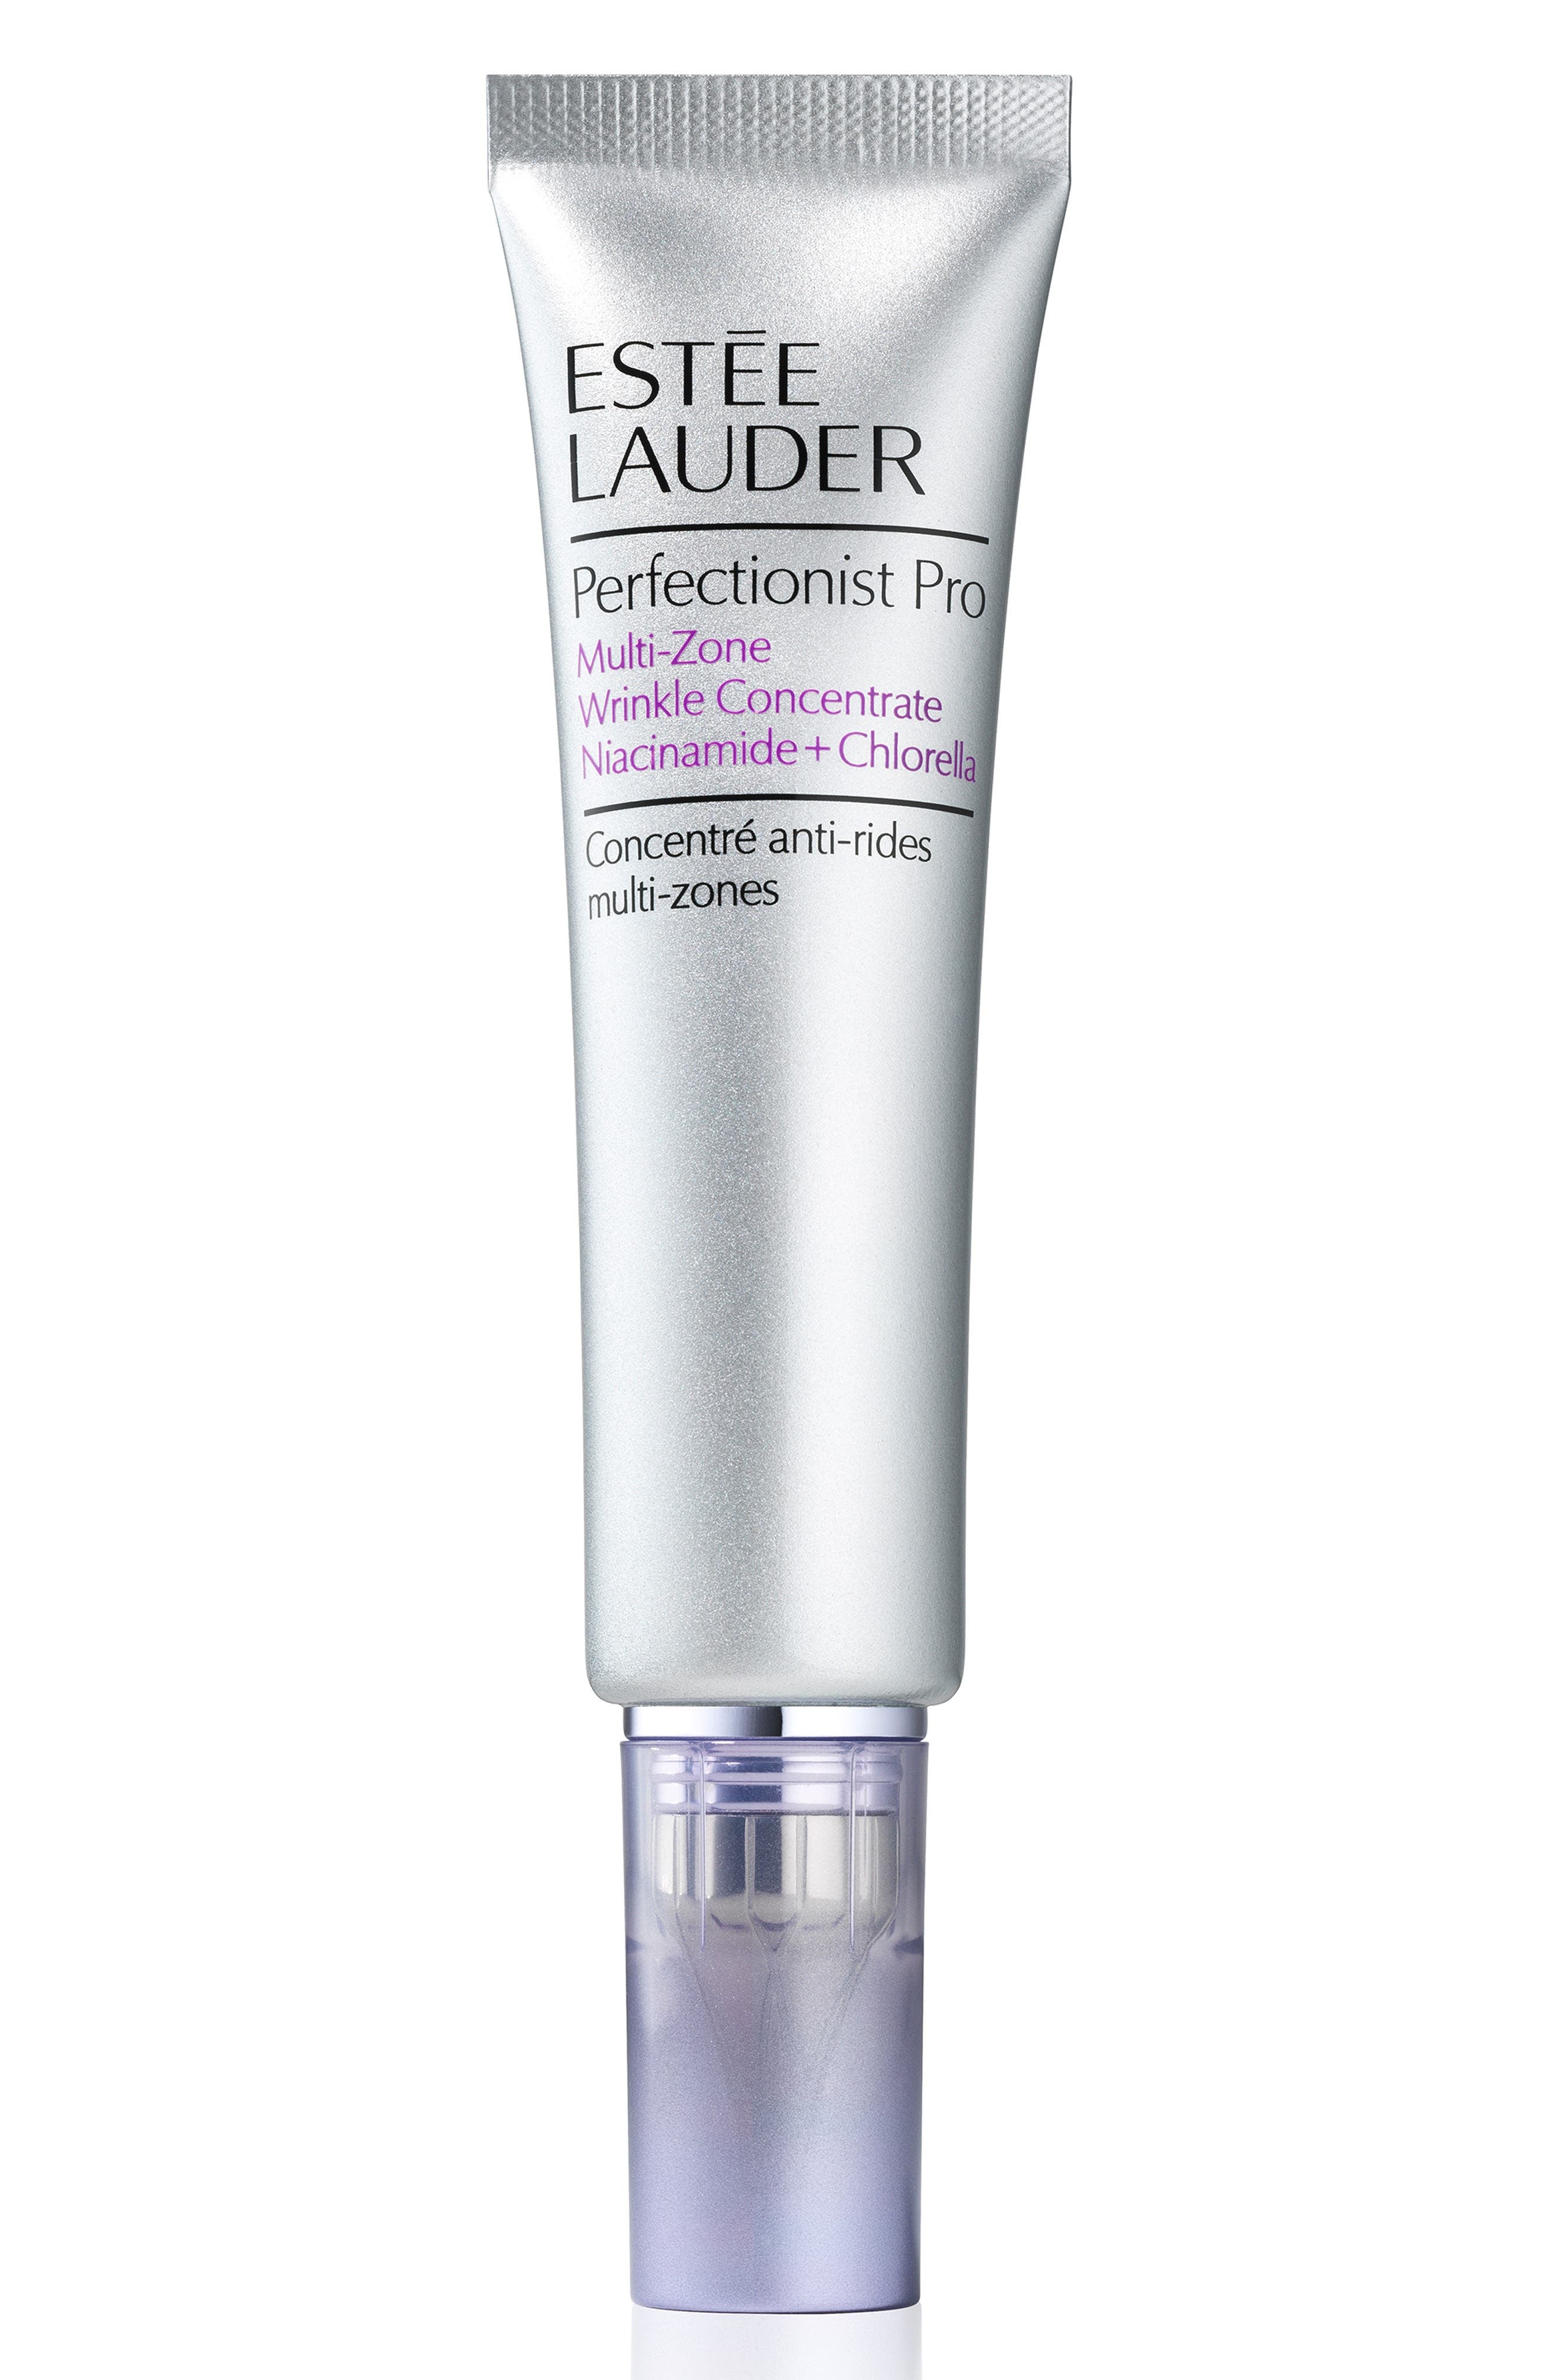 Estee Lauder Perfectionist Pro Multi-Zone Wrinkle Concentrate